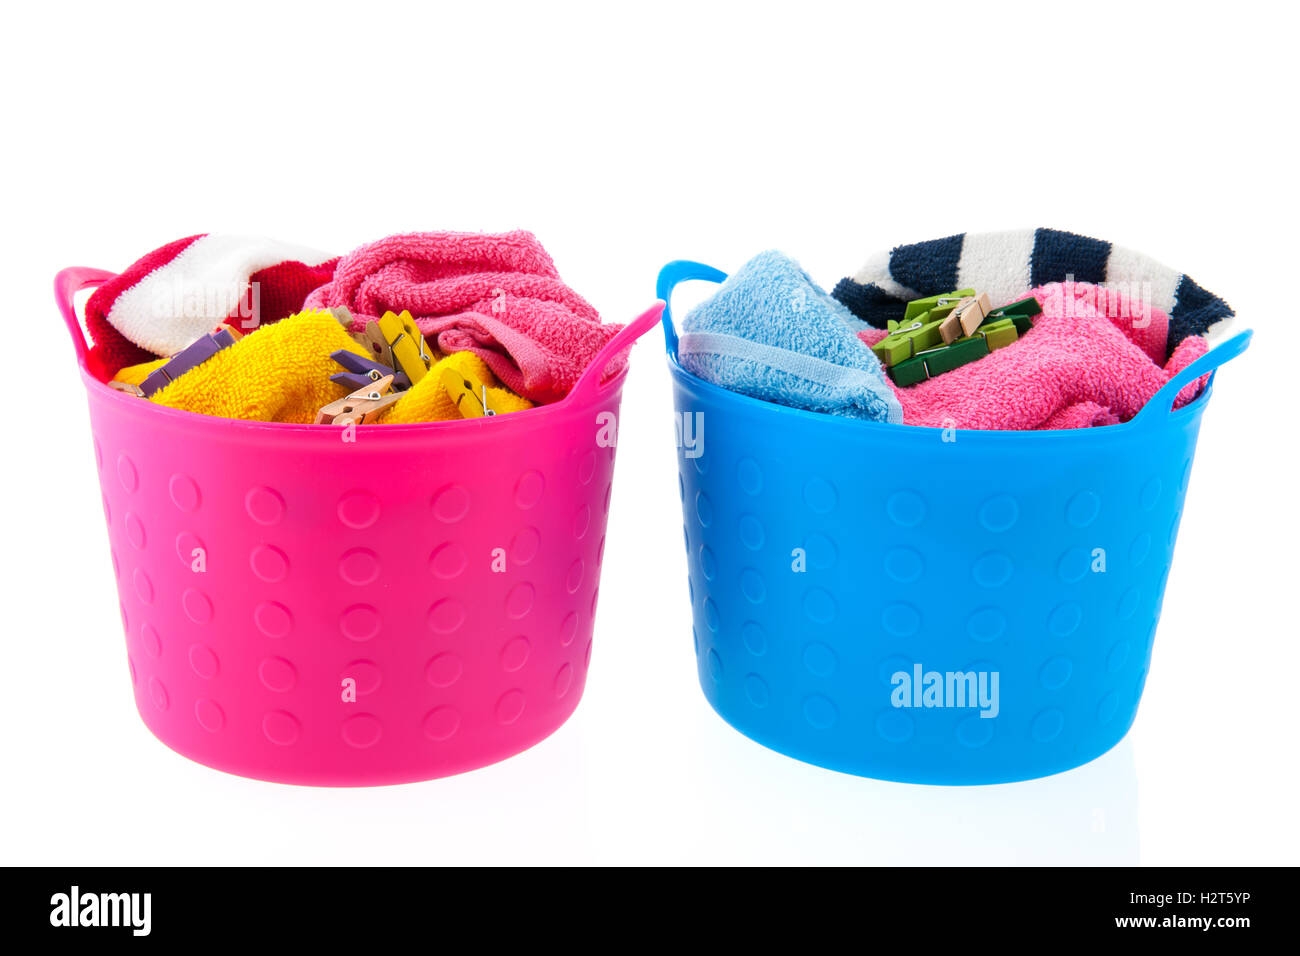 Laundry baskets in pink and blue Stock Photo